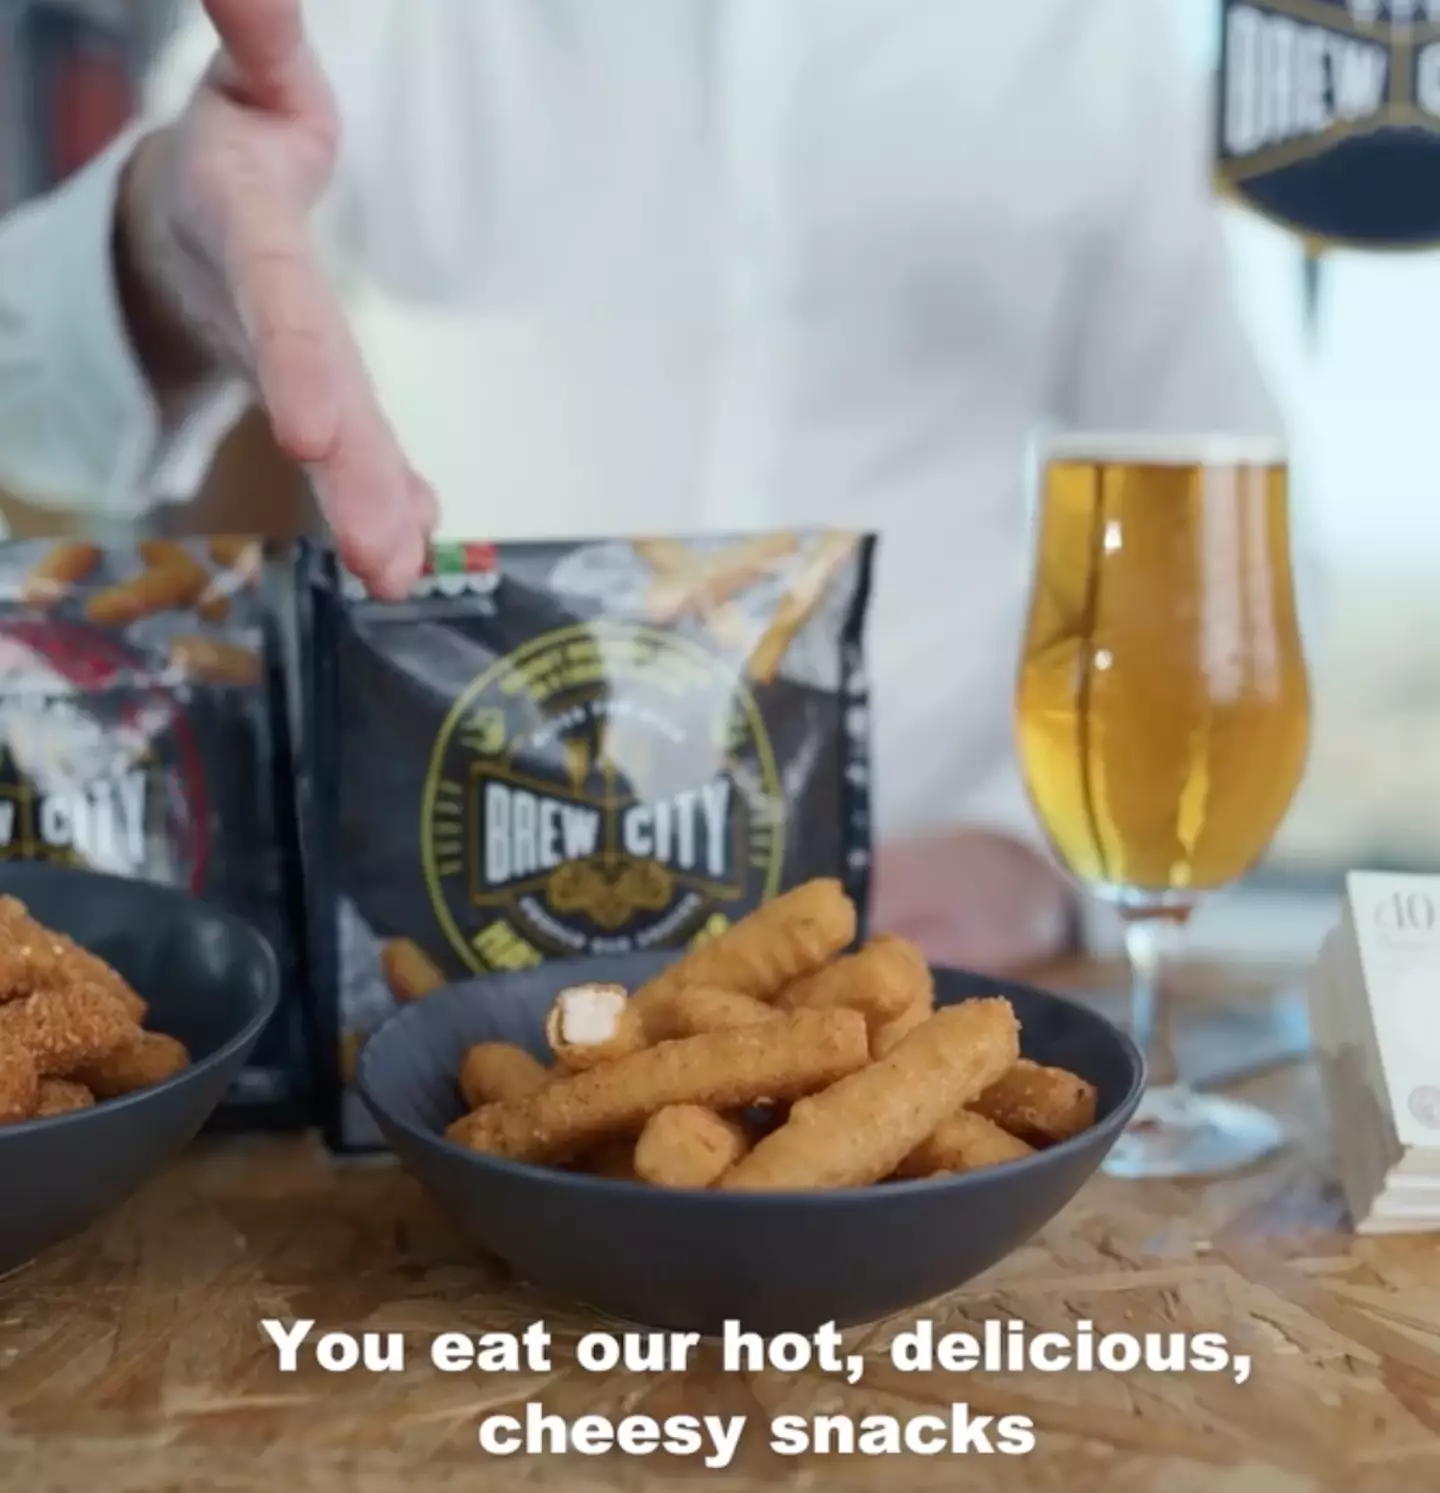 Who wouldn't want to get paid to eat a never-ending supply of cheesy snacks?